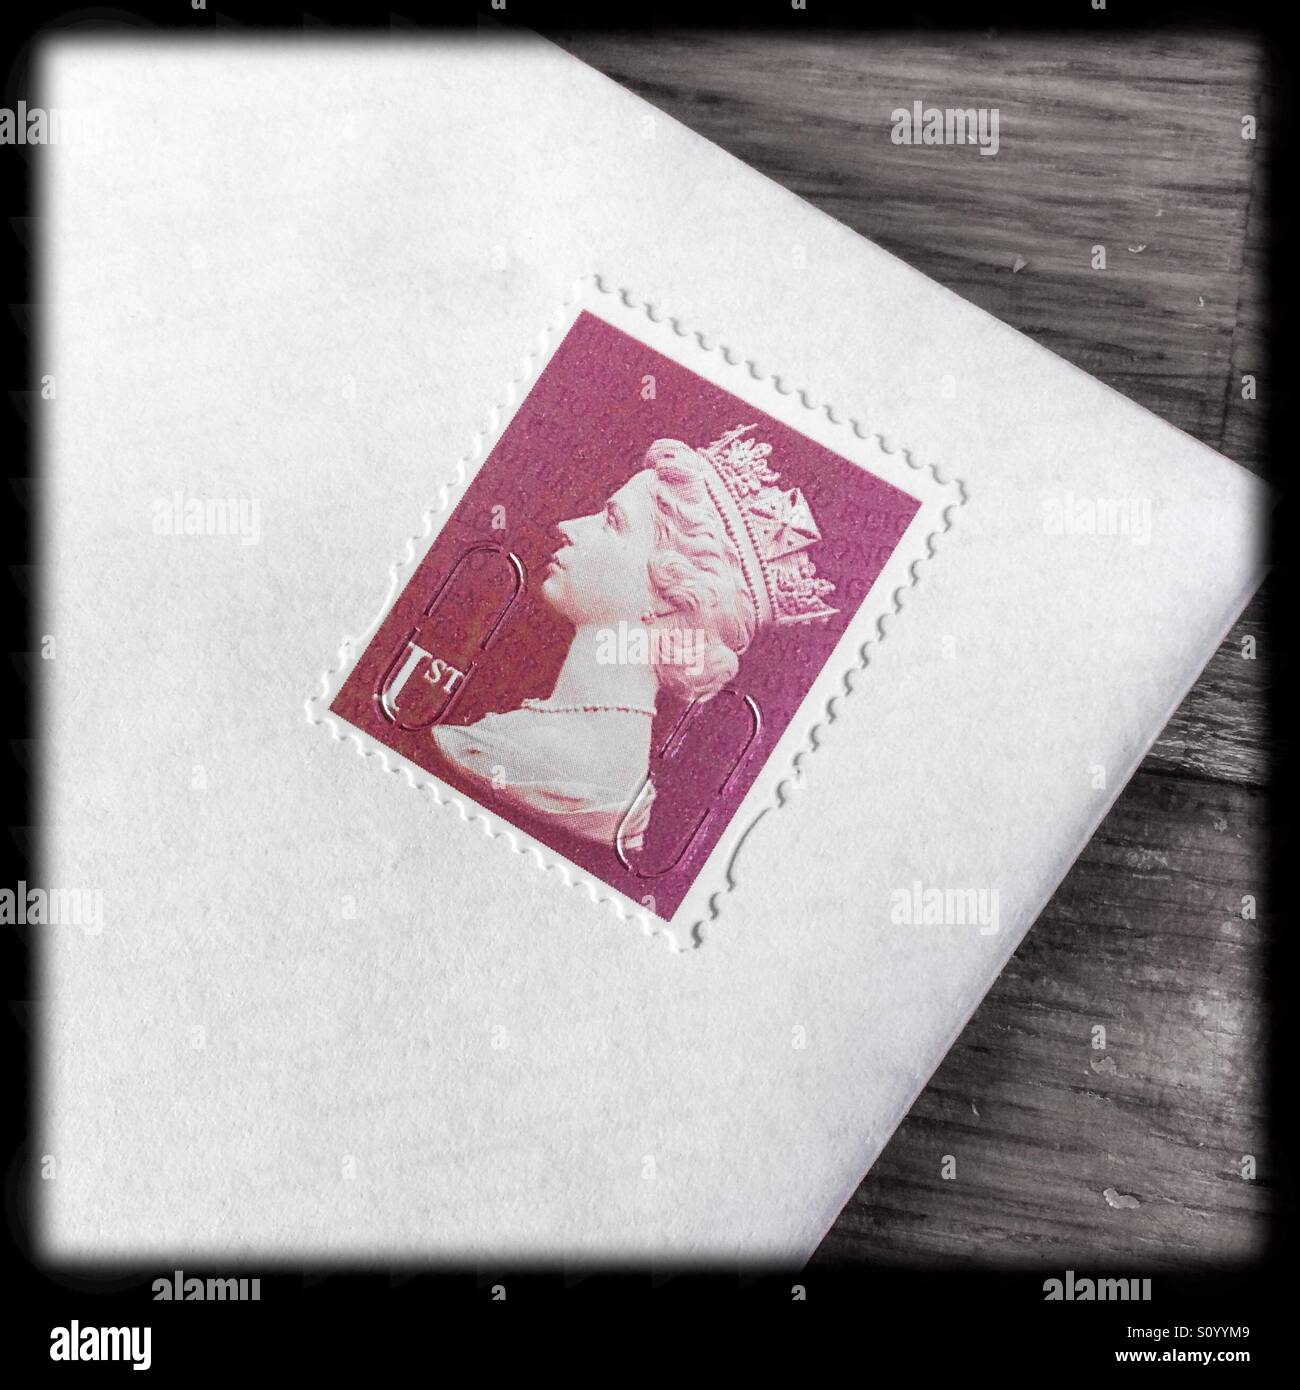 Close up view of a British first class stamp on a white envelope Stock Photo